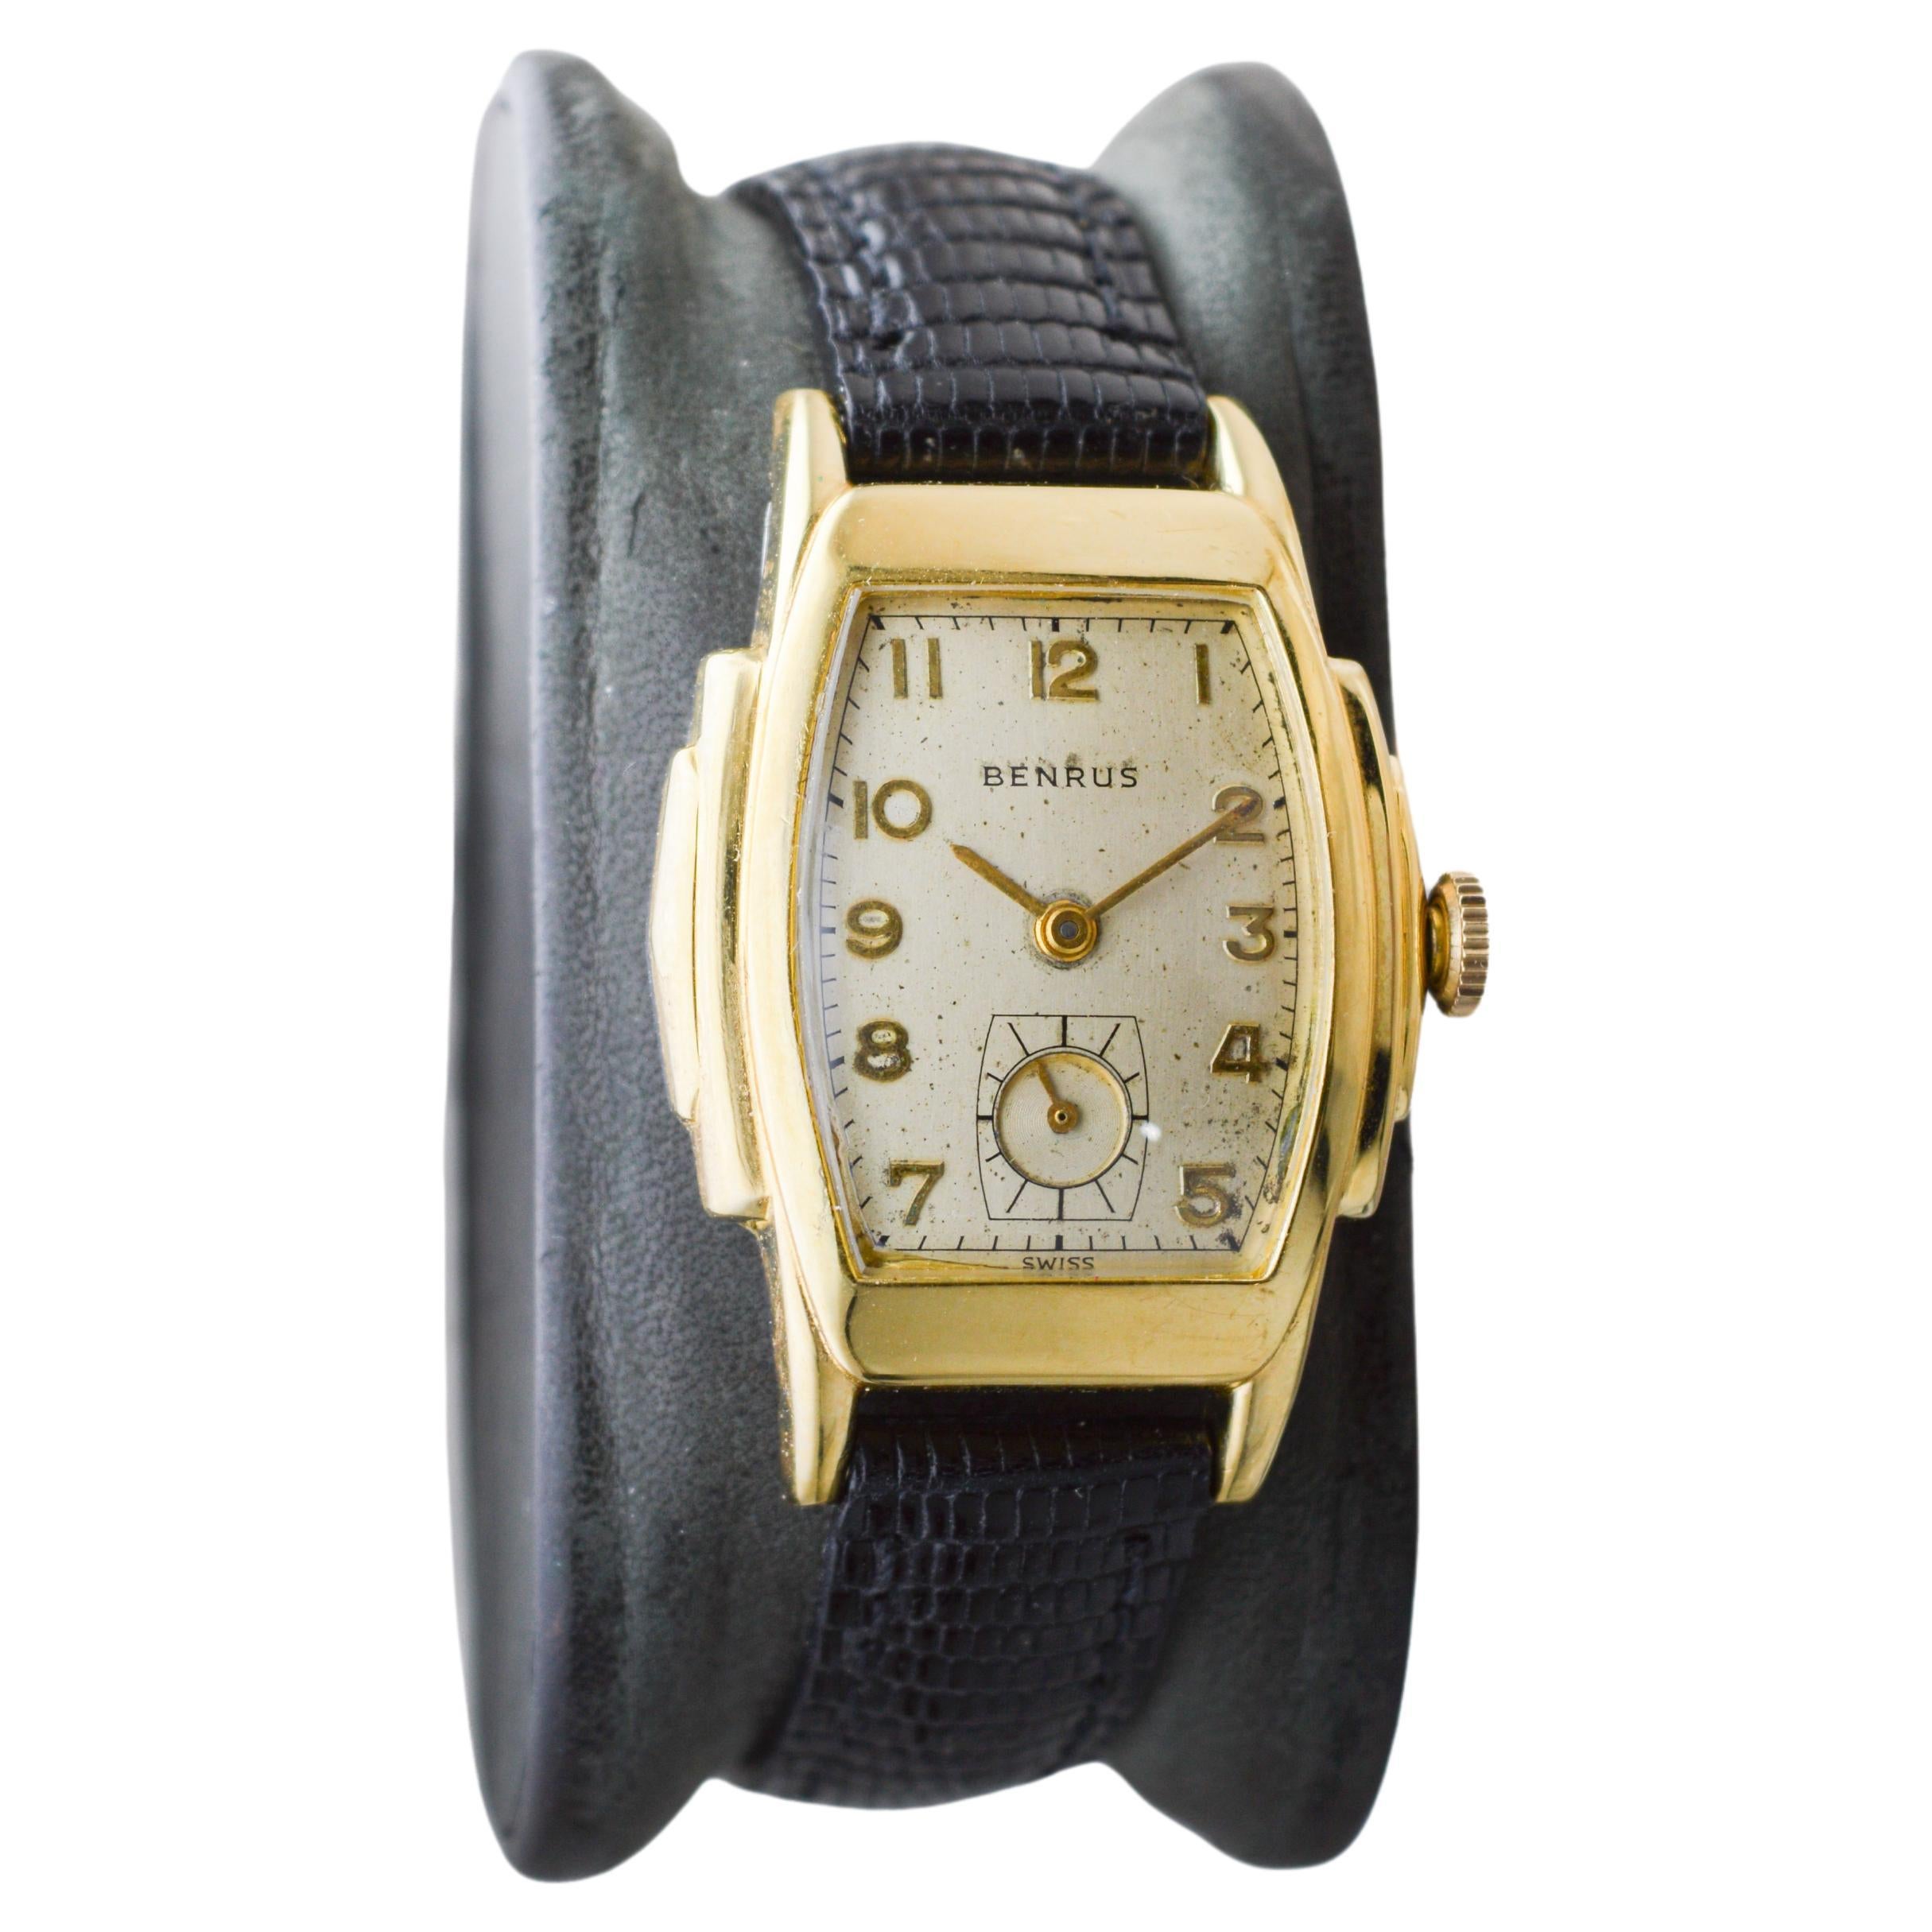 FACTORY / HOUSE: Benrus Watch Company
STYLE / REFERENCE: Art Deco / Curvex Style
METAL / MATERIAL: Gold-Filled
CIRCA / YEAR: 1940's
DIMENSIONS / SIZE: Length 40mm X Width 28mm
MOVEMENT / CALIBER: Manual Winding / 15 Jewels / Caliber 883
DIAL /